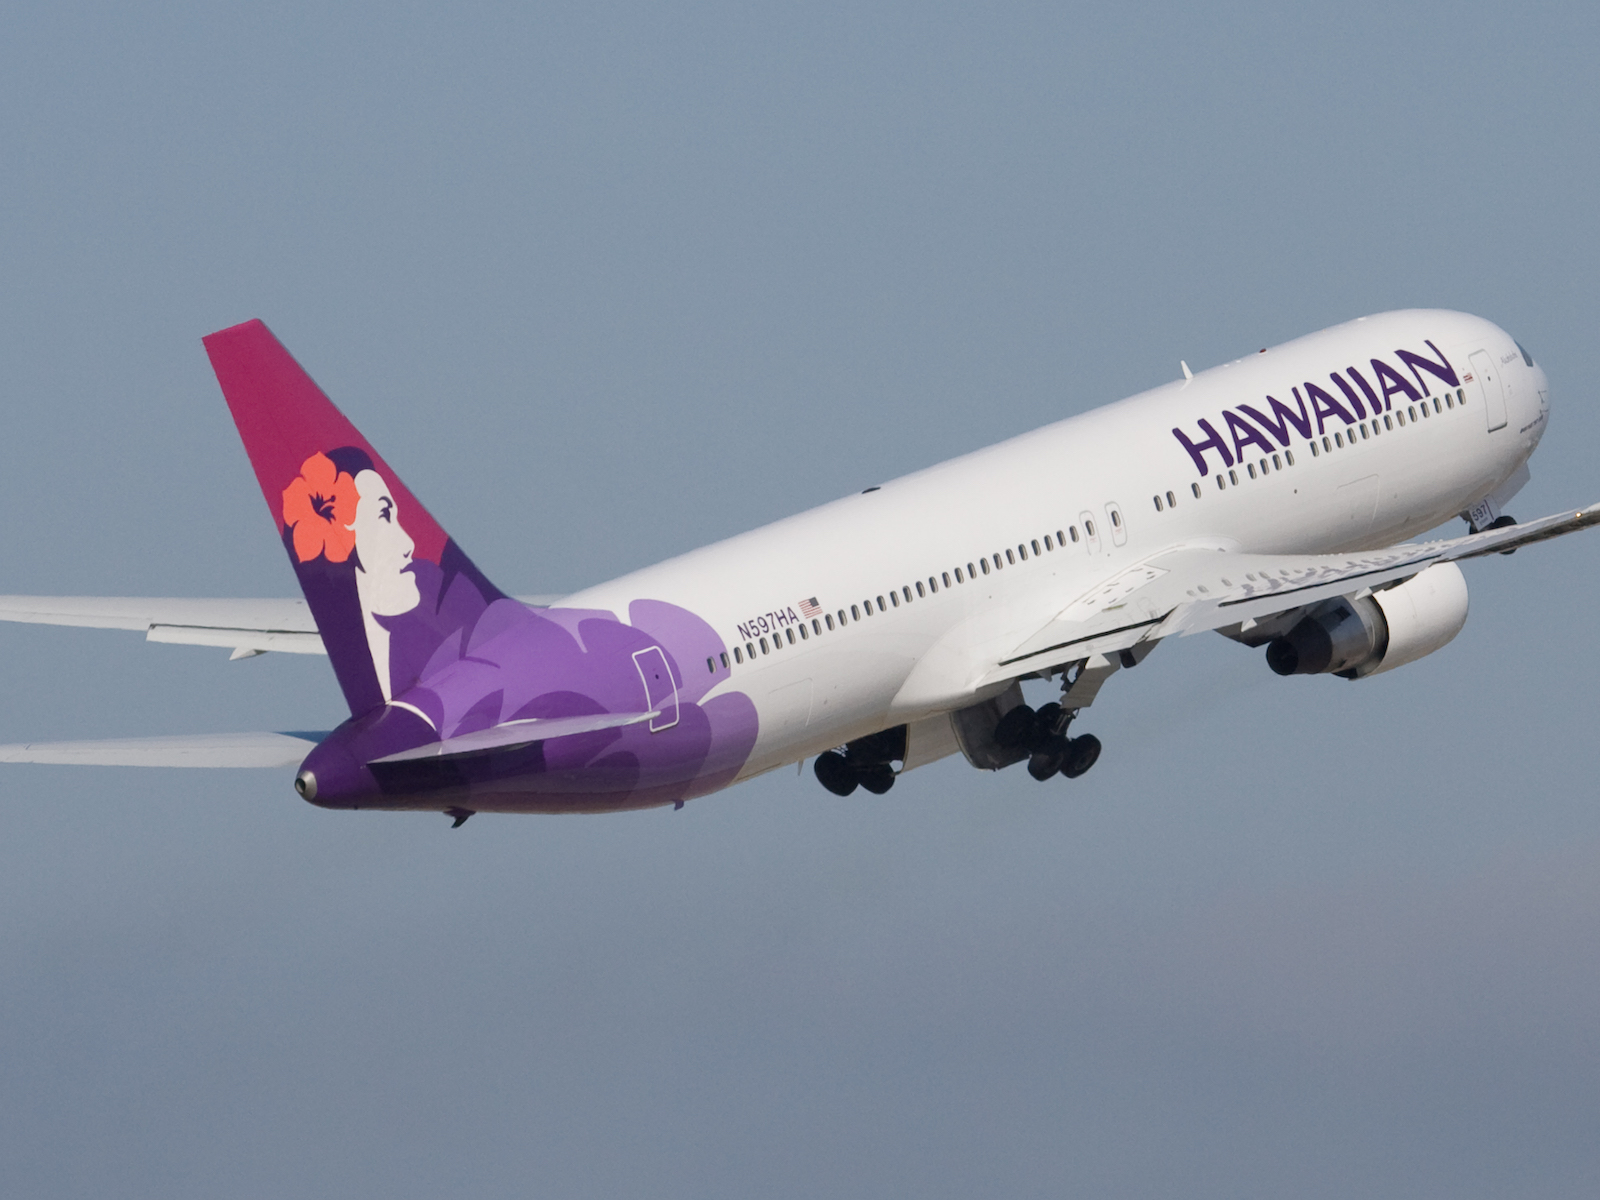 Hawaiian Airlines charges 10% of the adult ticket for a lap infant